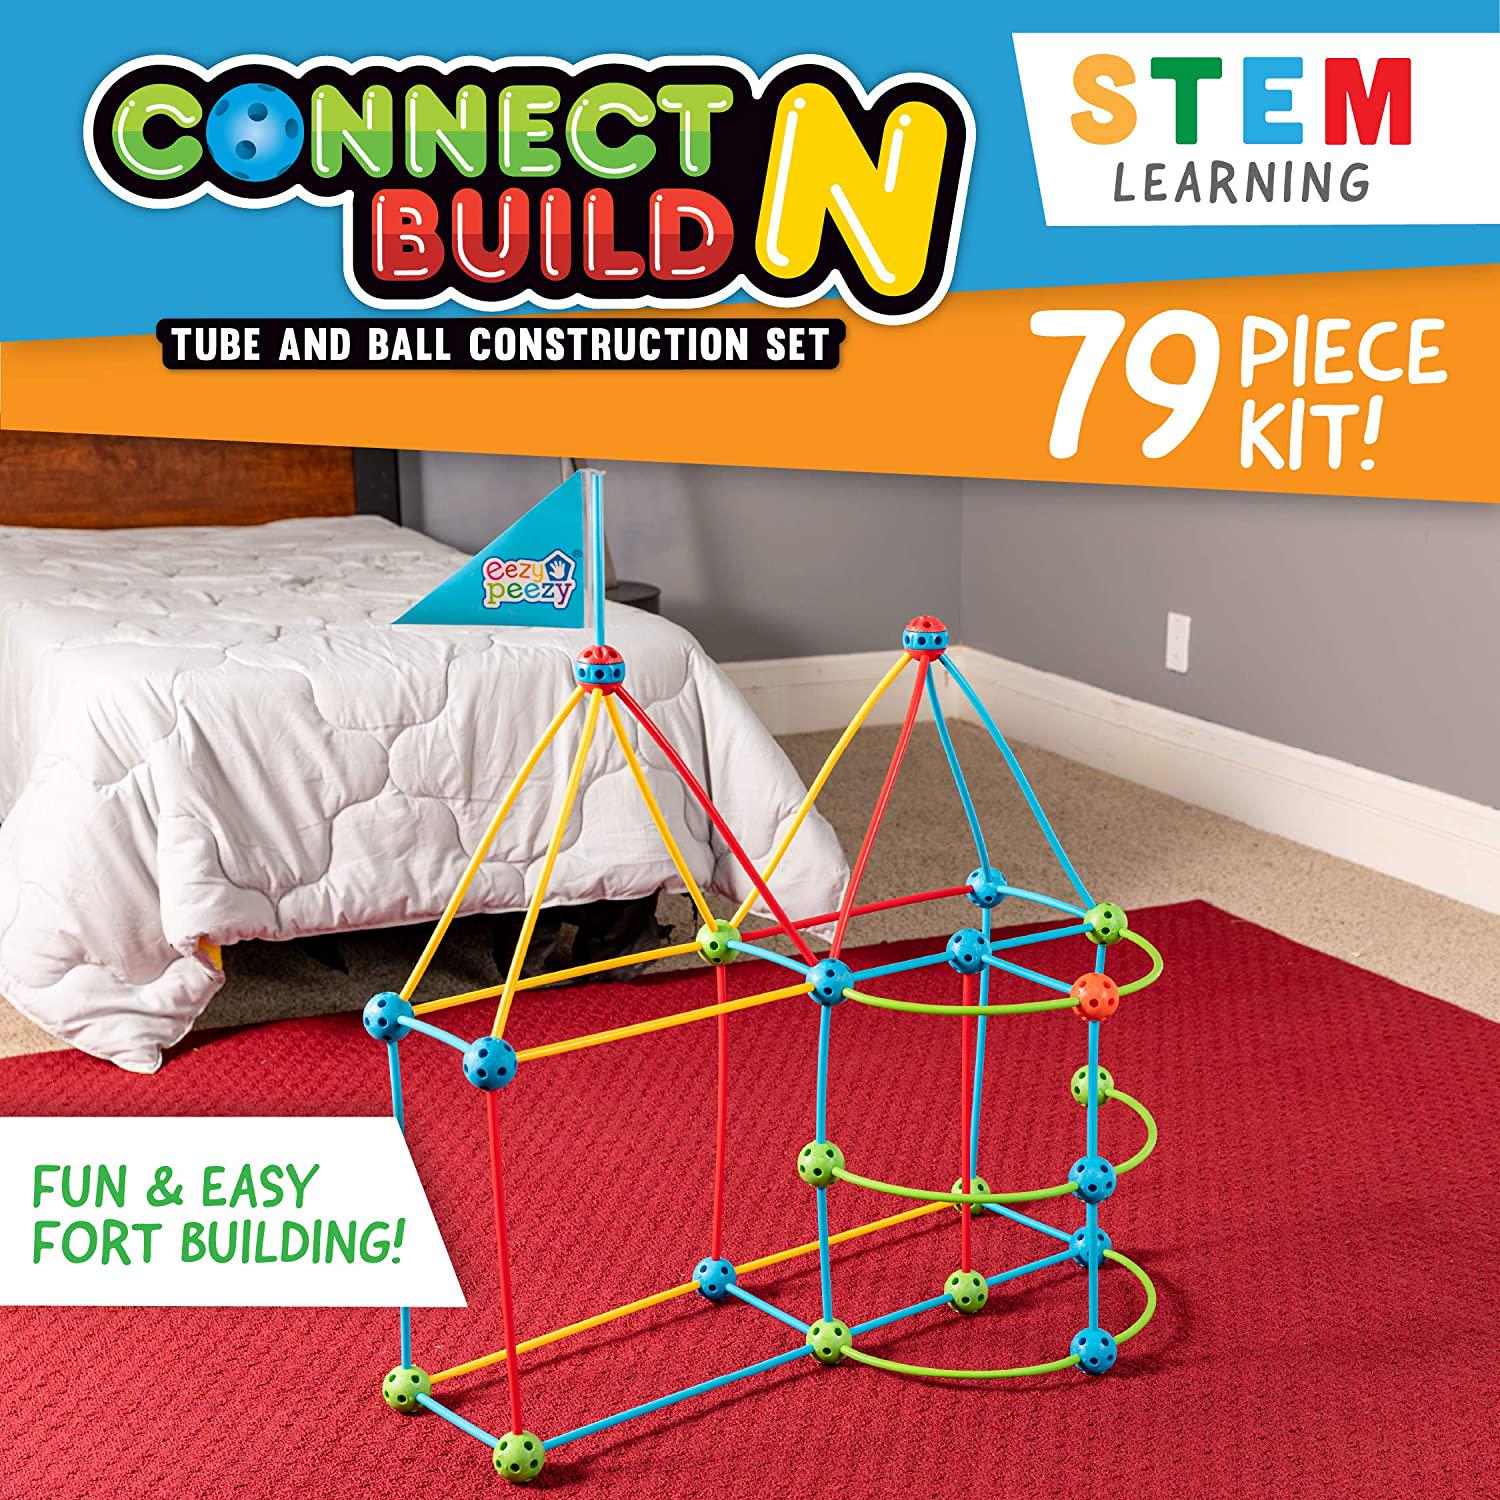 Eezy Peezy, Eezy Peezy Connect n Build Building Toys Starter Pack with 79 Pieces - Stem Toy for Kids